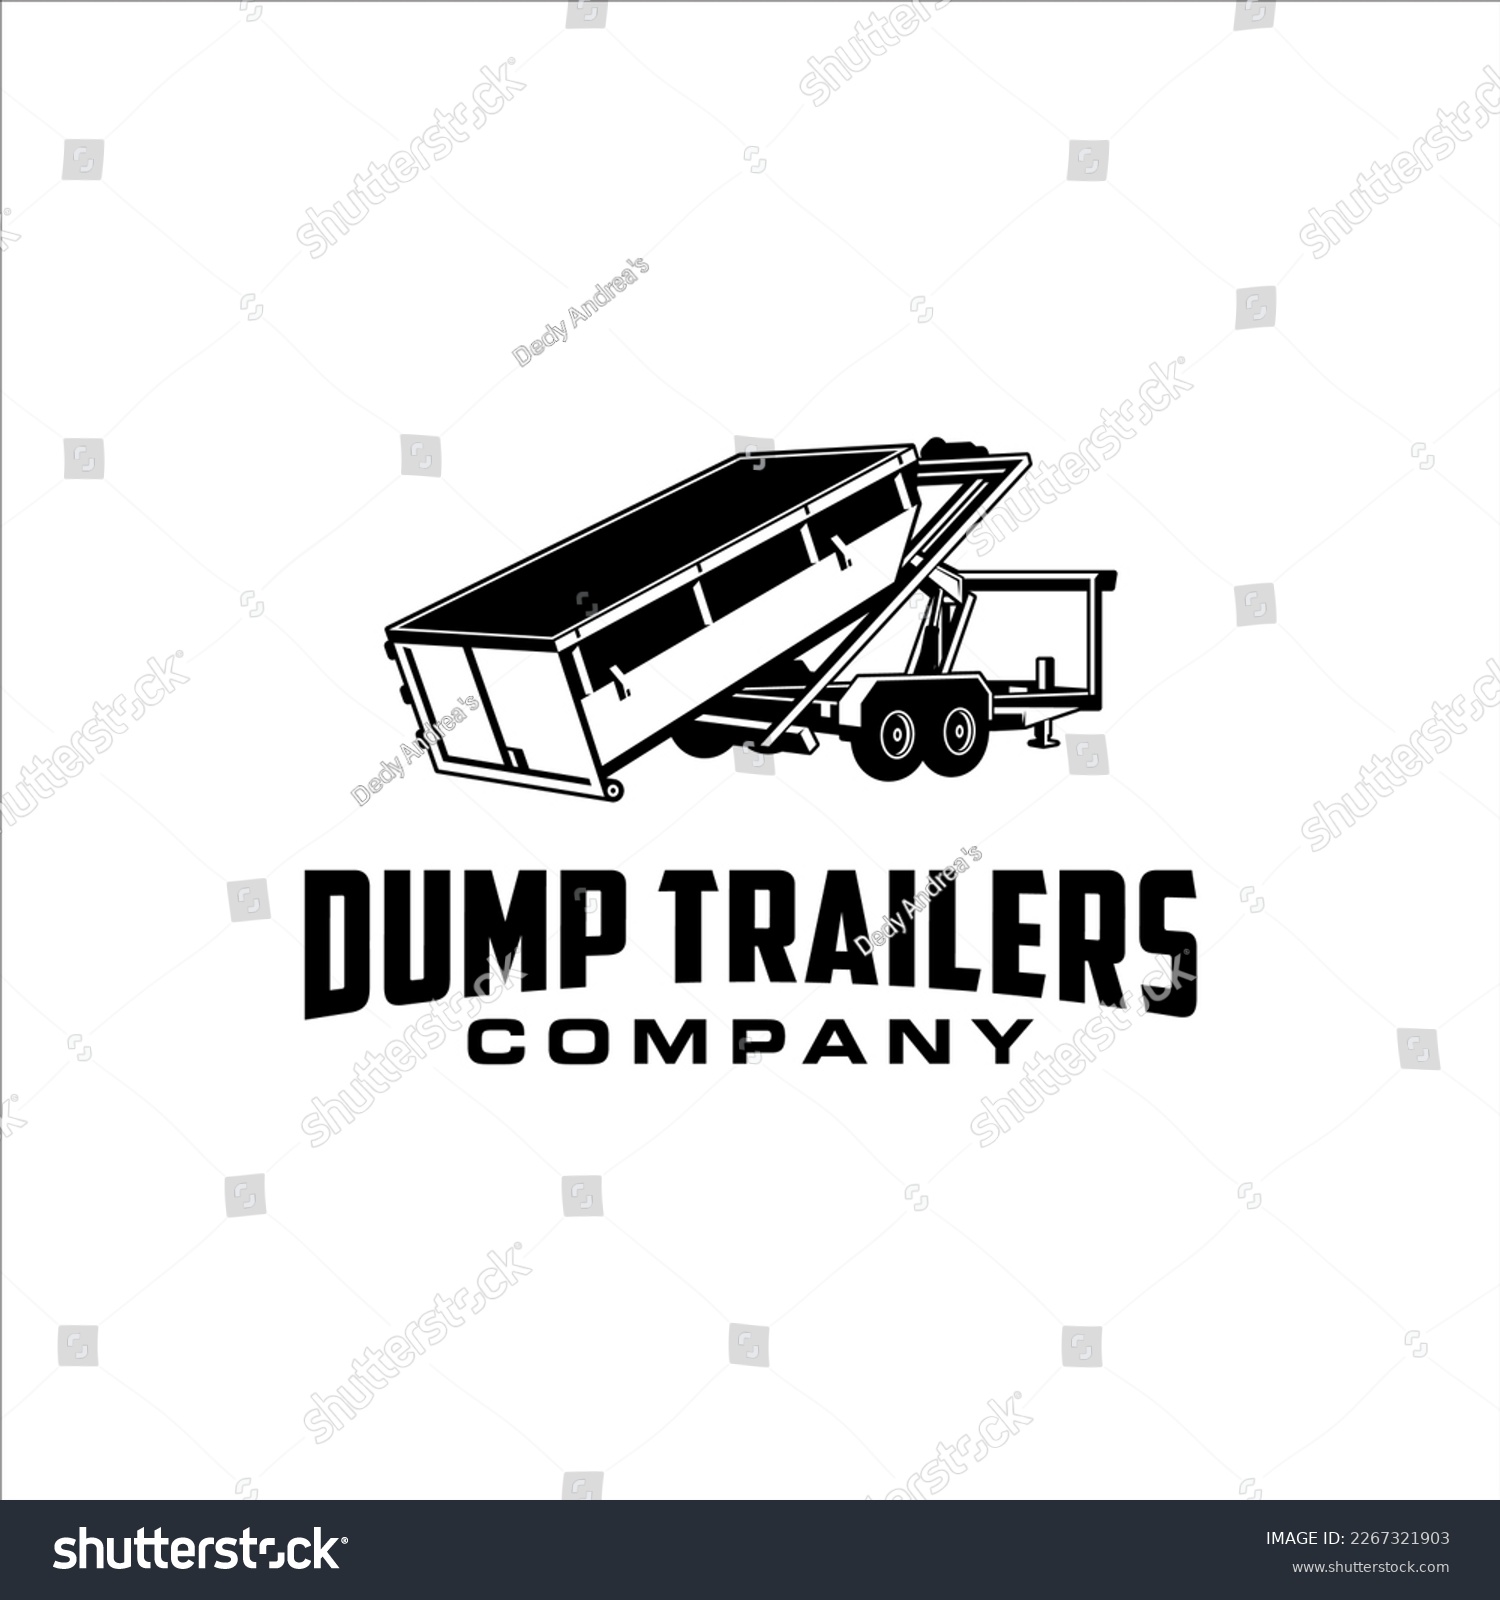 SVG of Roll off dumpsters logo with masculine style design svg